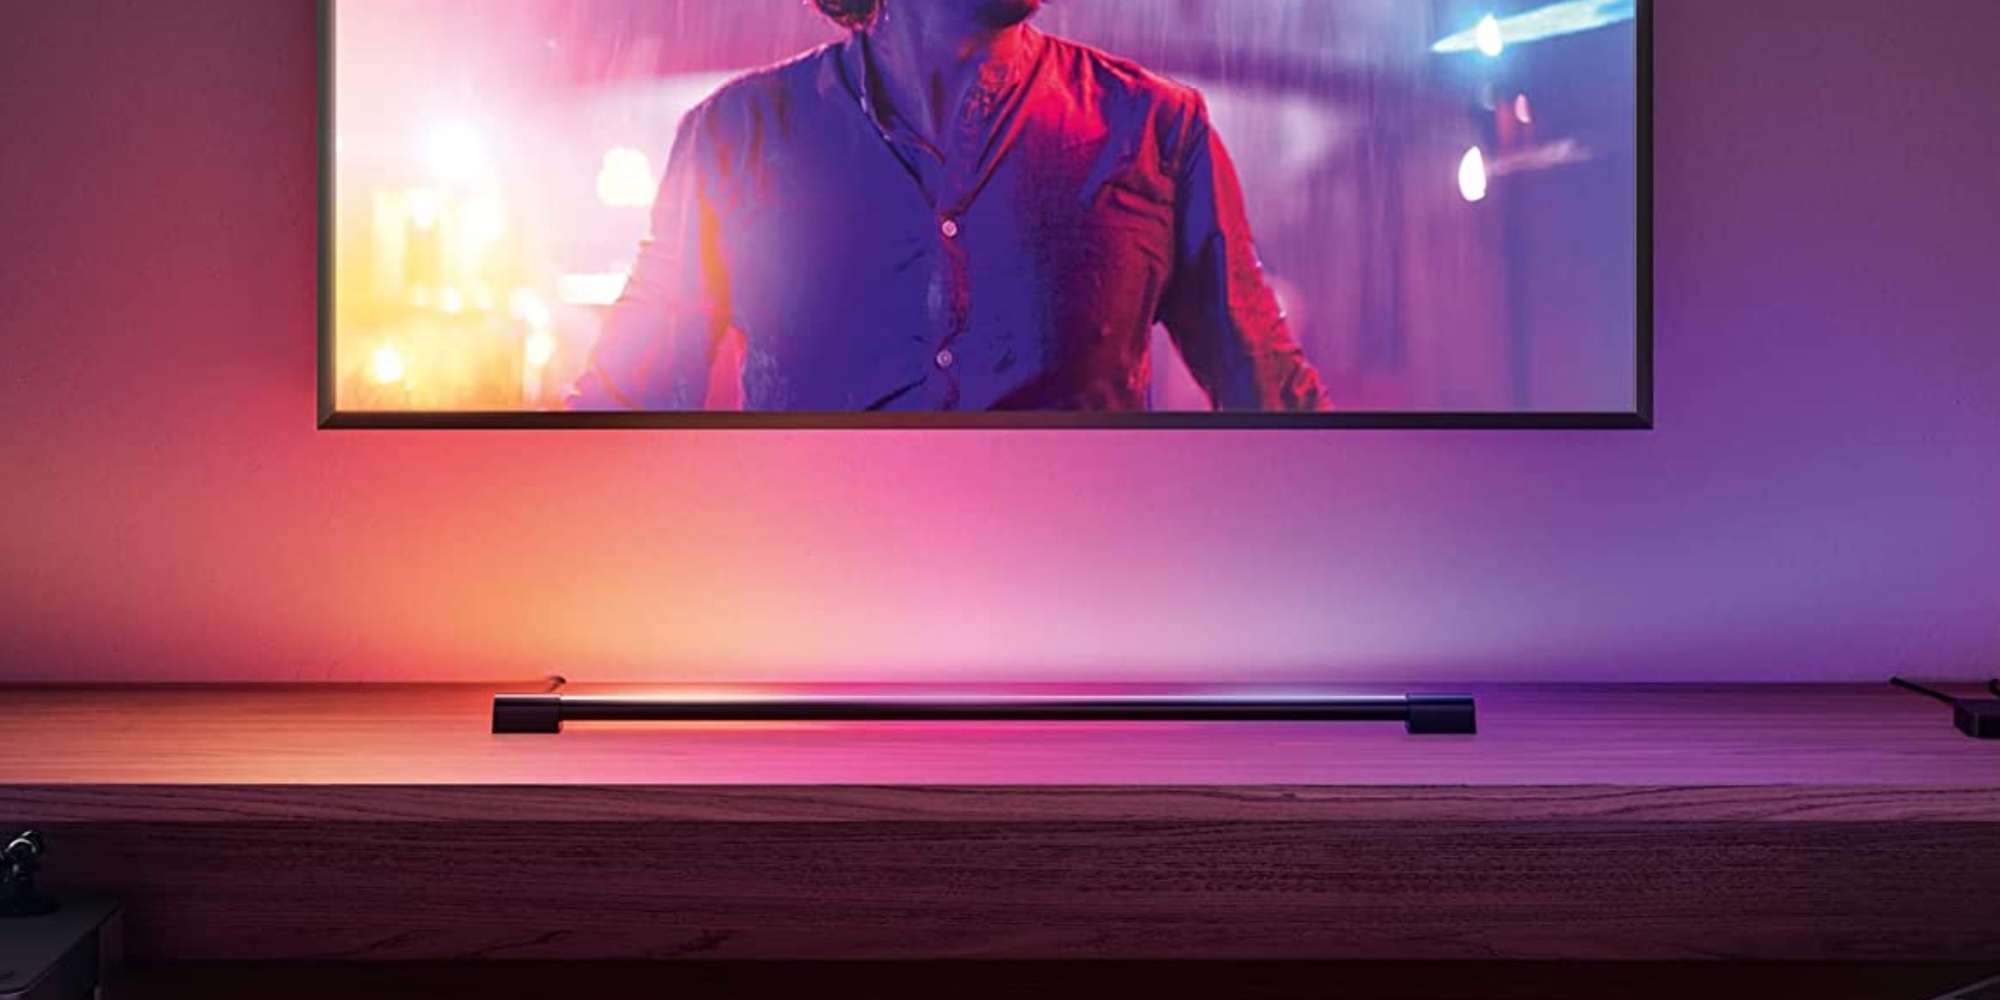 Philips Hue's Gradient lamps with addressable RGB lighting on sale from  $136 (Reg. $200+)